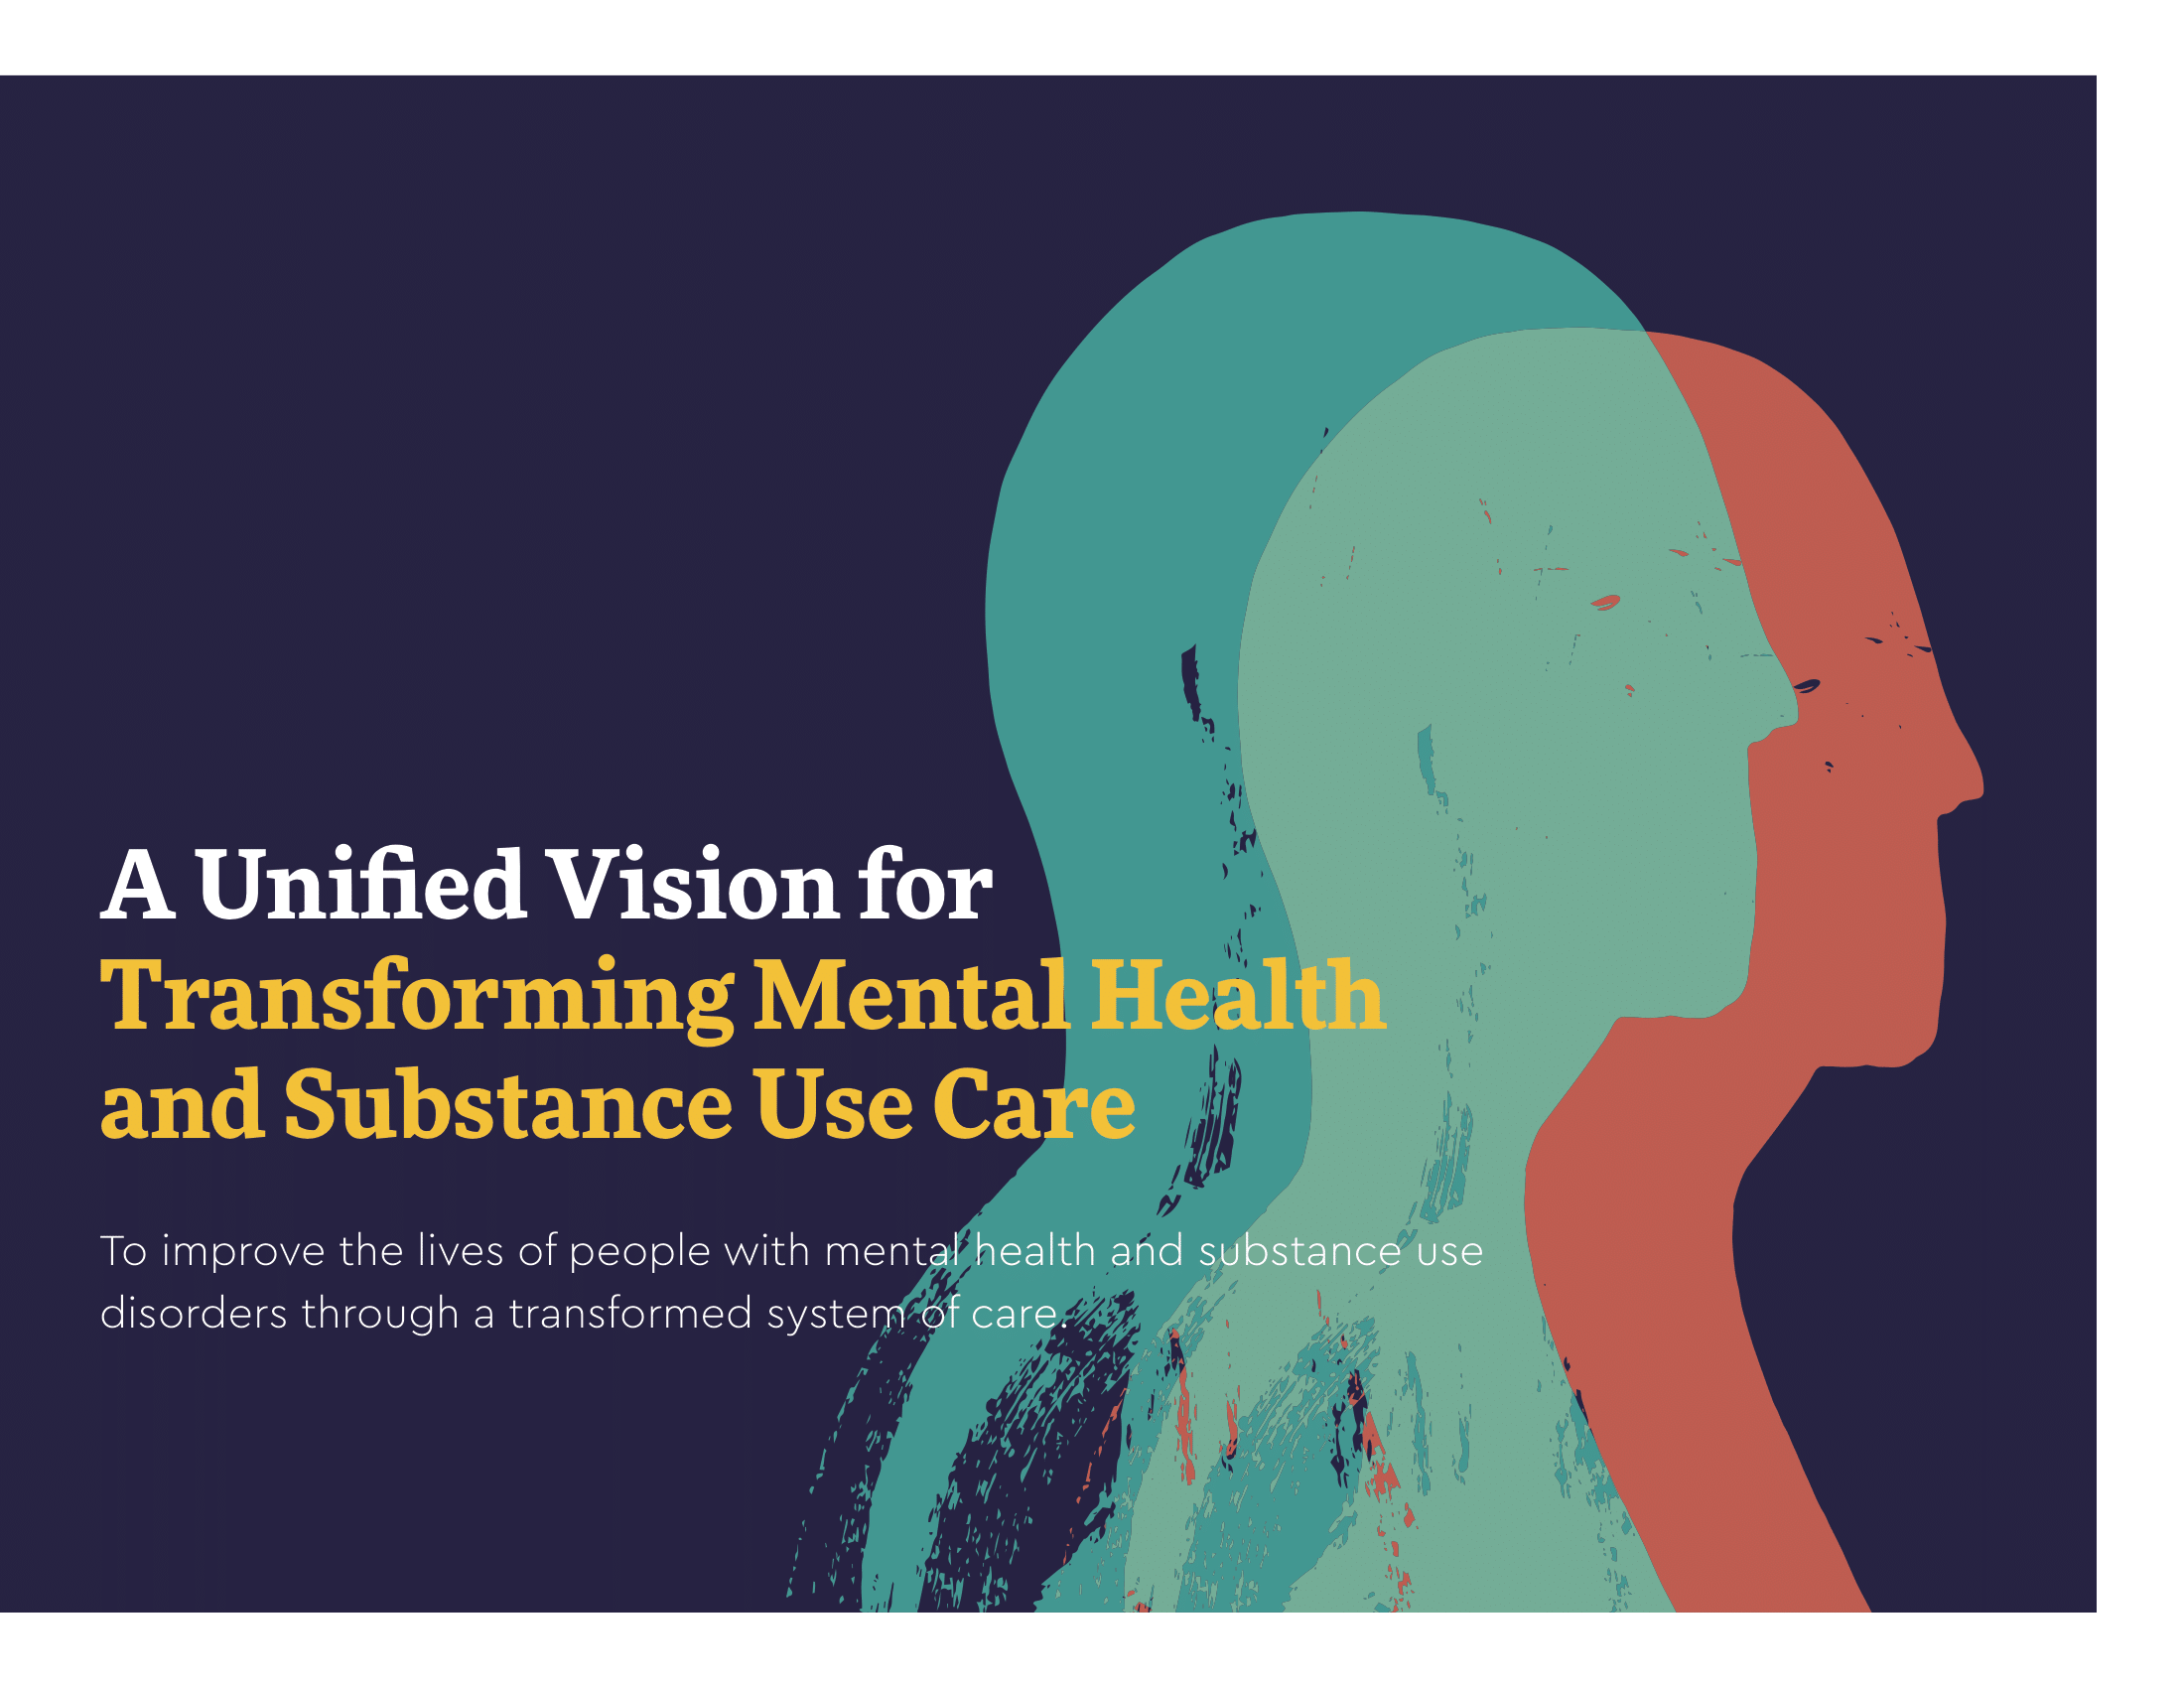 A Unified Vision for Transforming Mental Health and Substance Use Care